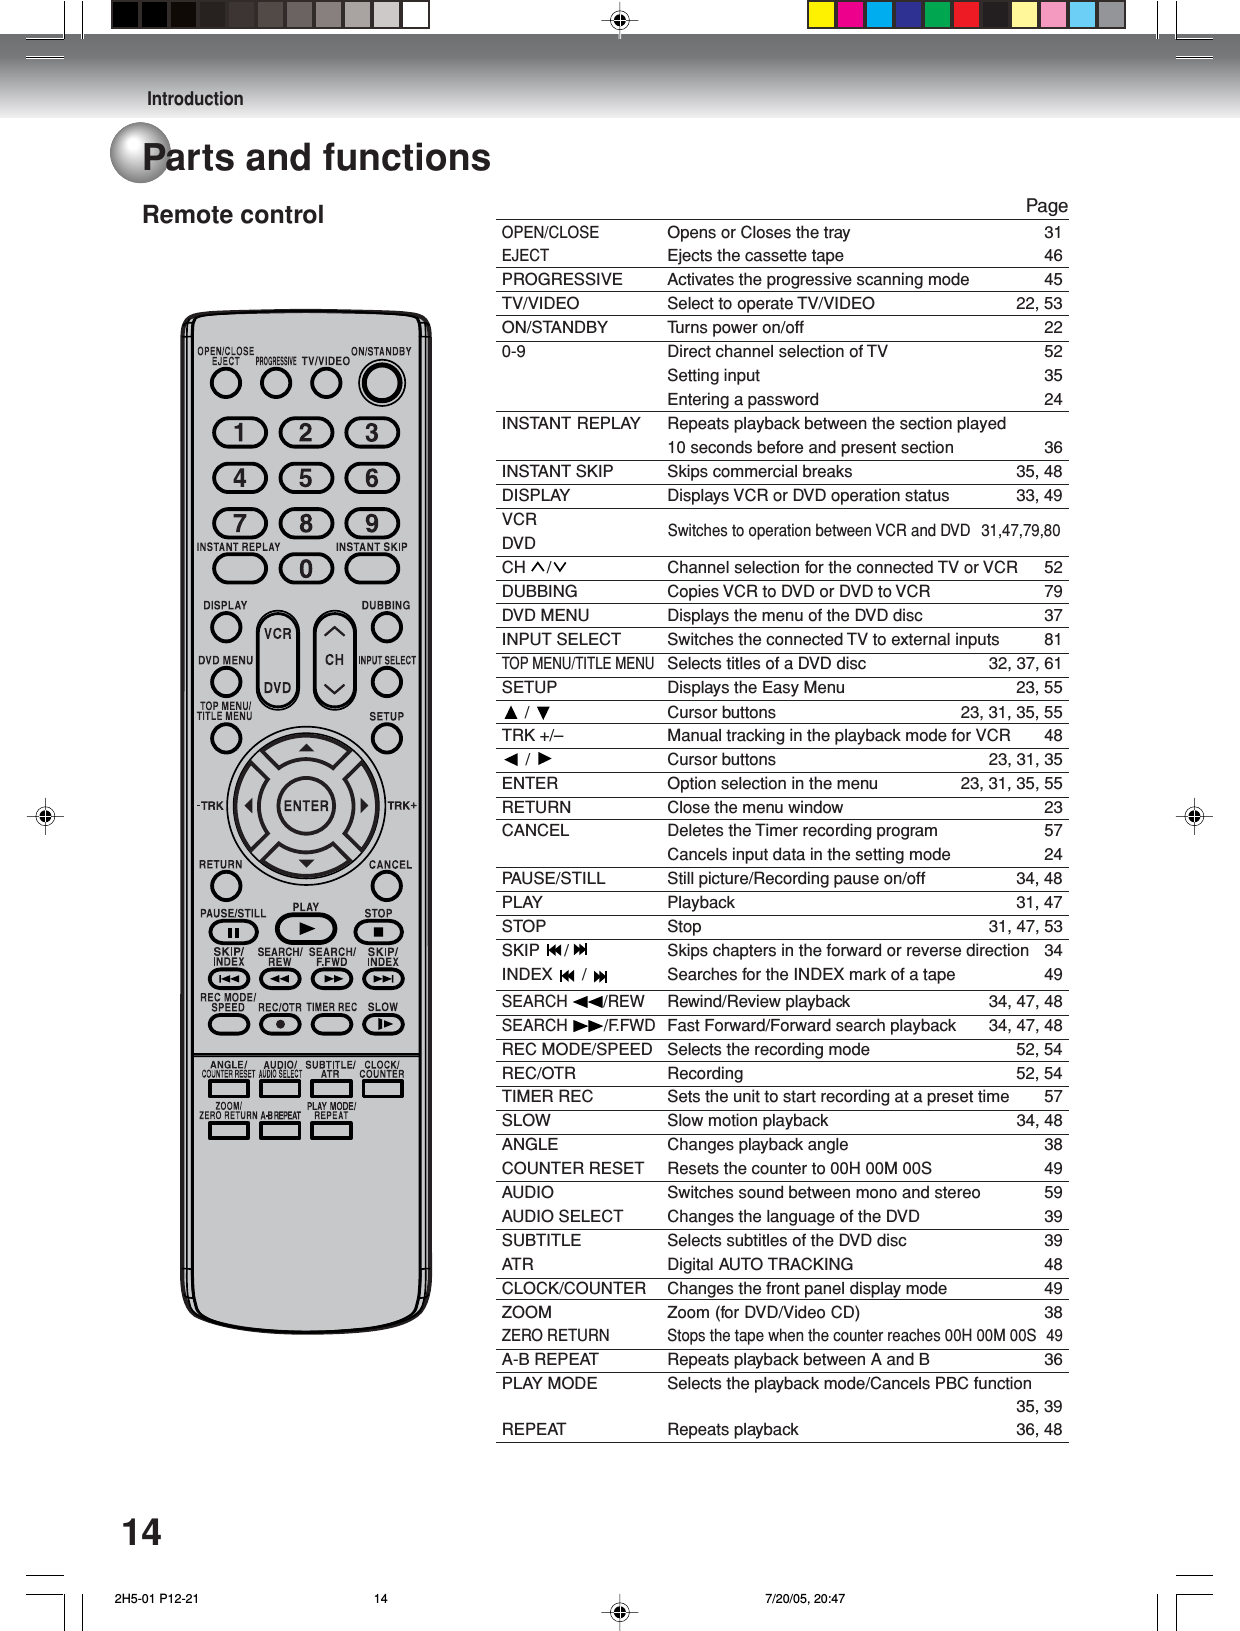 Introduction14OPEN/CLOSEOpens or Closes the tray 31EJECTEjects the cassette tape 46PROGRESSIVE Activates the progressive scanning mode 45TV/VIDEO Select to operate TV/VIDEO 22, 53ON/STANDBY Turns power on/off 220-9 Direct channel selection of TV 52Setting input 35Entering a password 24INSTANT REPLAY Repeats playback between the section played10 seconds before and present section 36INSTANT SKIP Skips commercial breaks 35, 48DISPLAY Displays VCR or DVD operation status 33, 49VCRDVDCH / Channel selection for the connected TV or VCR 52DUBBING Copies VCR to DVD or DVD to VCR 79DVD MENU Displays the menu of the DVD disc 37INPUT SELECT Switches the connected TV to external inputs 81TOP MENU/TITLE MENUSelects titles of a DVD disc 32, 37, 61SETUP Displays the Easy Menu 23, 55/Cursor buttons 23, 31, 35, 55TRK +/– Manual tracking in the playback mode for VCR 48 /  Cursor buttons 23, 31, 35ENTER Option selection in the menu 23, 31, 35, 55RETURN Close the menu window 23CANCEL Deletes the Timer recording program 57Cancels input data in the setting mode 24PAUSE/STILL Still picture/Recording pause on/off 34, 48PLAY Playback 31, 47STOP Stop 31, 47, 53SKIP / Skips chapters in the forward or reverse direction 34INDEX  /  Searches for the INDEX mark of a tape 49SEARCH /REWRewind/Review playback 34, 47, 48SEARCH /F.FWDFast Forward/Forward search playback 34, 47, 48REC MODE/SPEED Selects the recording mode 52, 54REC/OTR Recording 52, 54TIMER REC Sets the unit to start recording at a preset time 57SLOW Slow motion playback  34, 48ANGLE Changes playback angle 38COUNTER RESET Resets the counter to 00H 00M 00S 49AUDIO Switches sound between mono and stereo 59AUDIO SELECT Changes the language of the DVD 39SUBTITLE Selects subtitles of the DVD disc 39ATR Digital AUTO TRACKING 48CLOCK/COUNTER Changes the front panel display mode 49ZOOM Zoom (for DVD/Video CD) 38ZERO RETURN Stops the tape when the counter reaches 00H 00M 00S 49A-B REPEAT Repeats playback between A and B 36PLAY MODE Selects the playback mode/Cancels PBC function35, 39REPEAT Repeats playback 36, 48Remote control PageParts and functionsSwitches to operation between VCR and DVD 31,47,79,80 2H5-01 P12-21 7/20/05, 20:4714